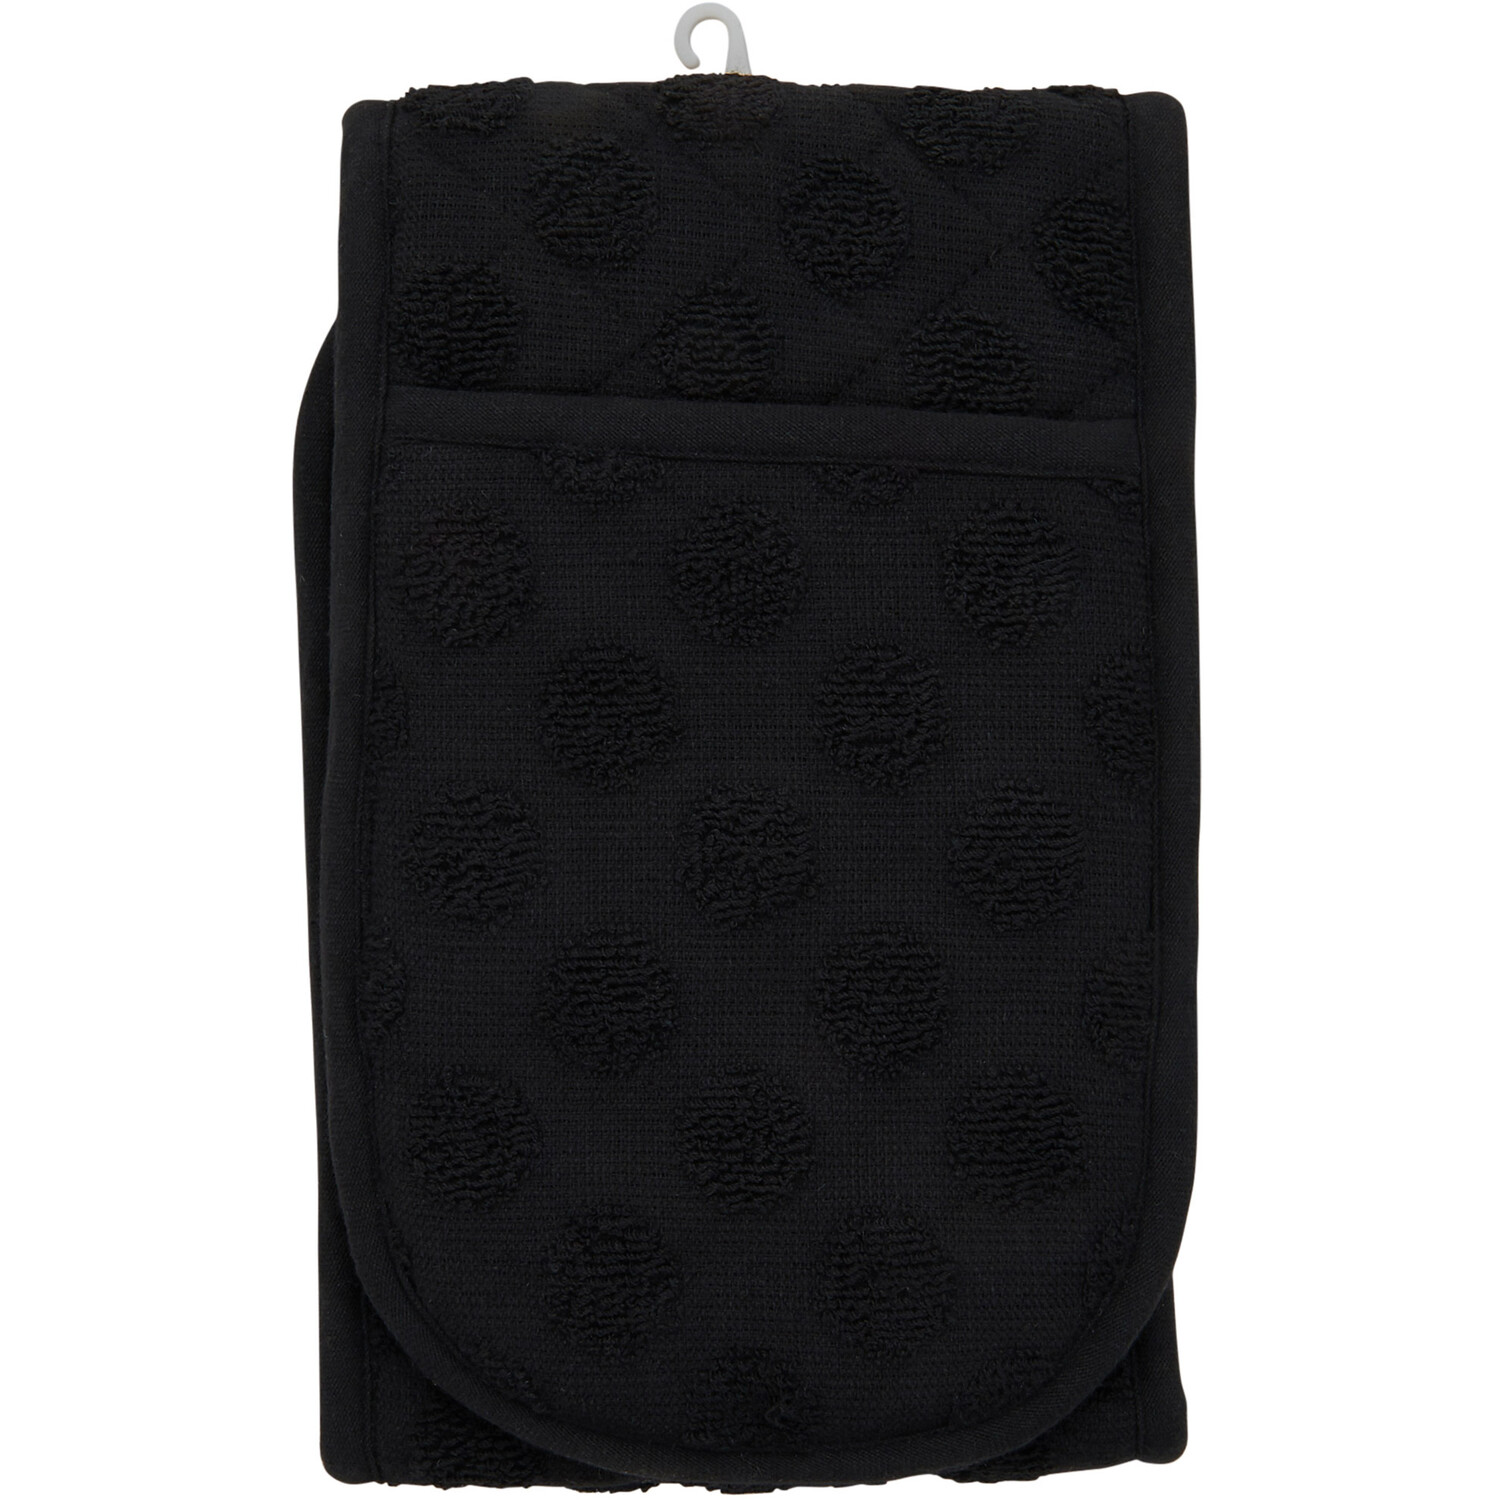 Dobby Terry Double Oven Glove - Black Image 1